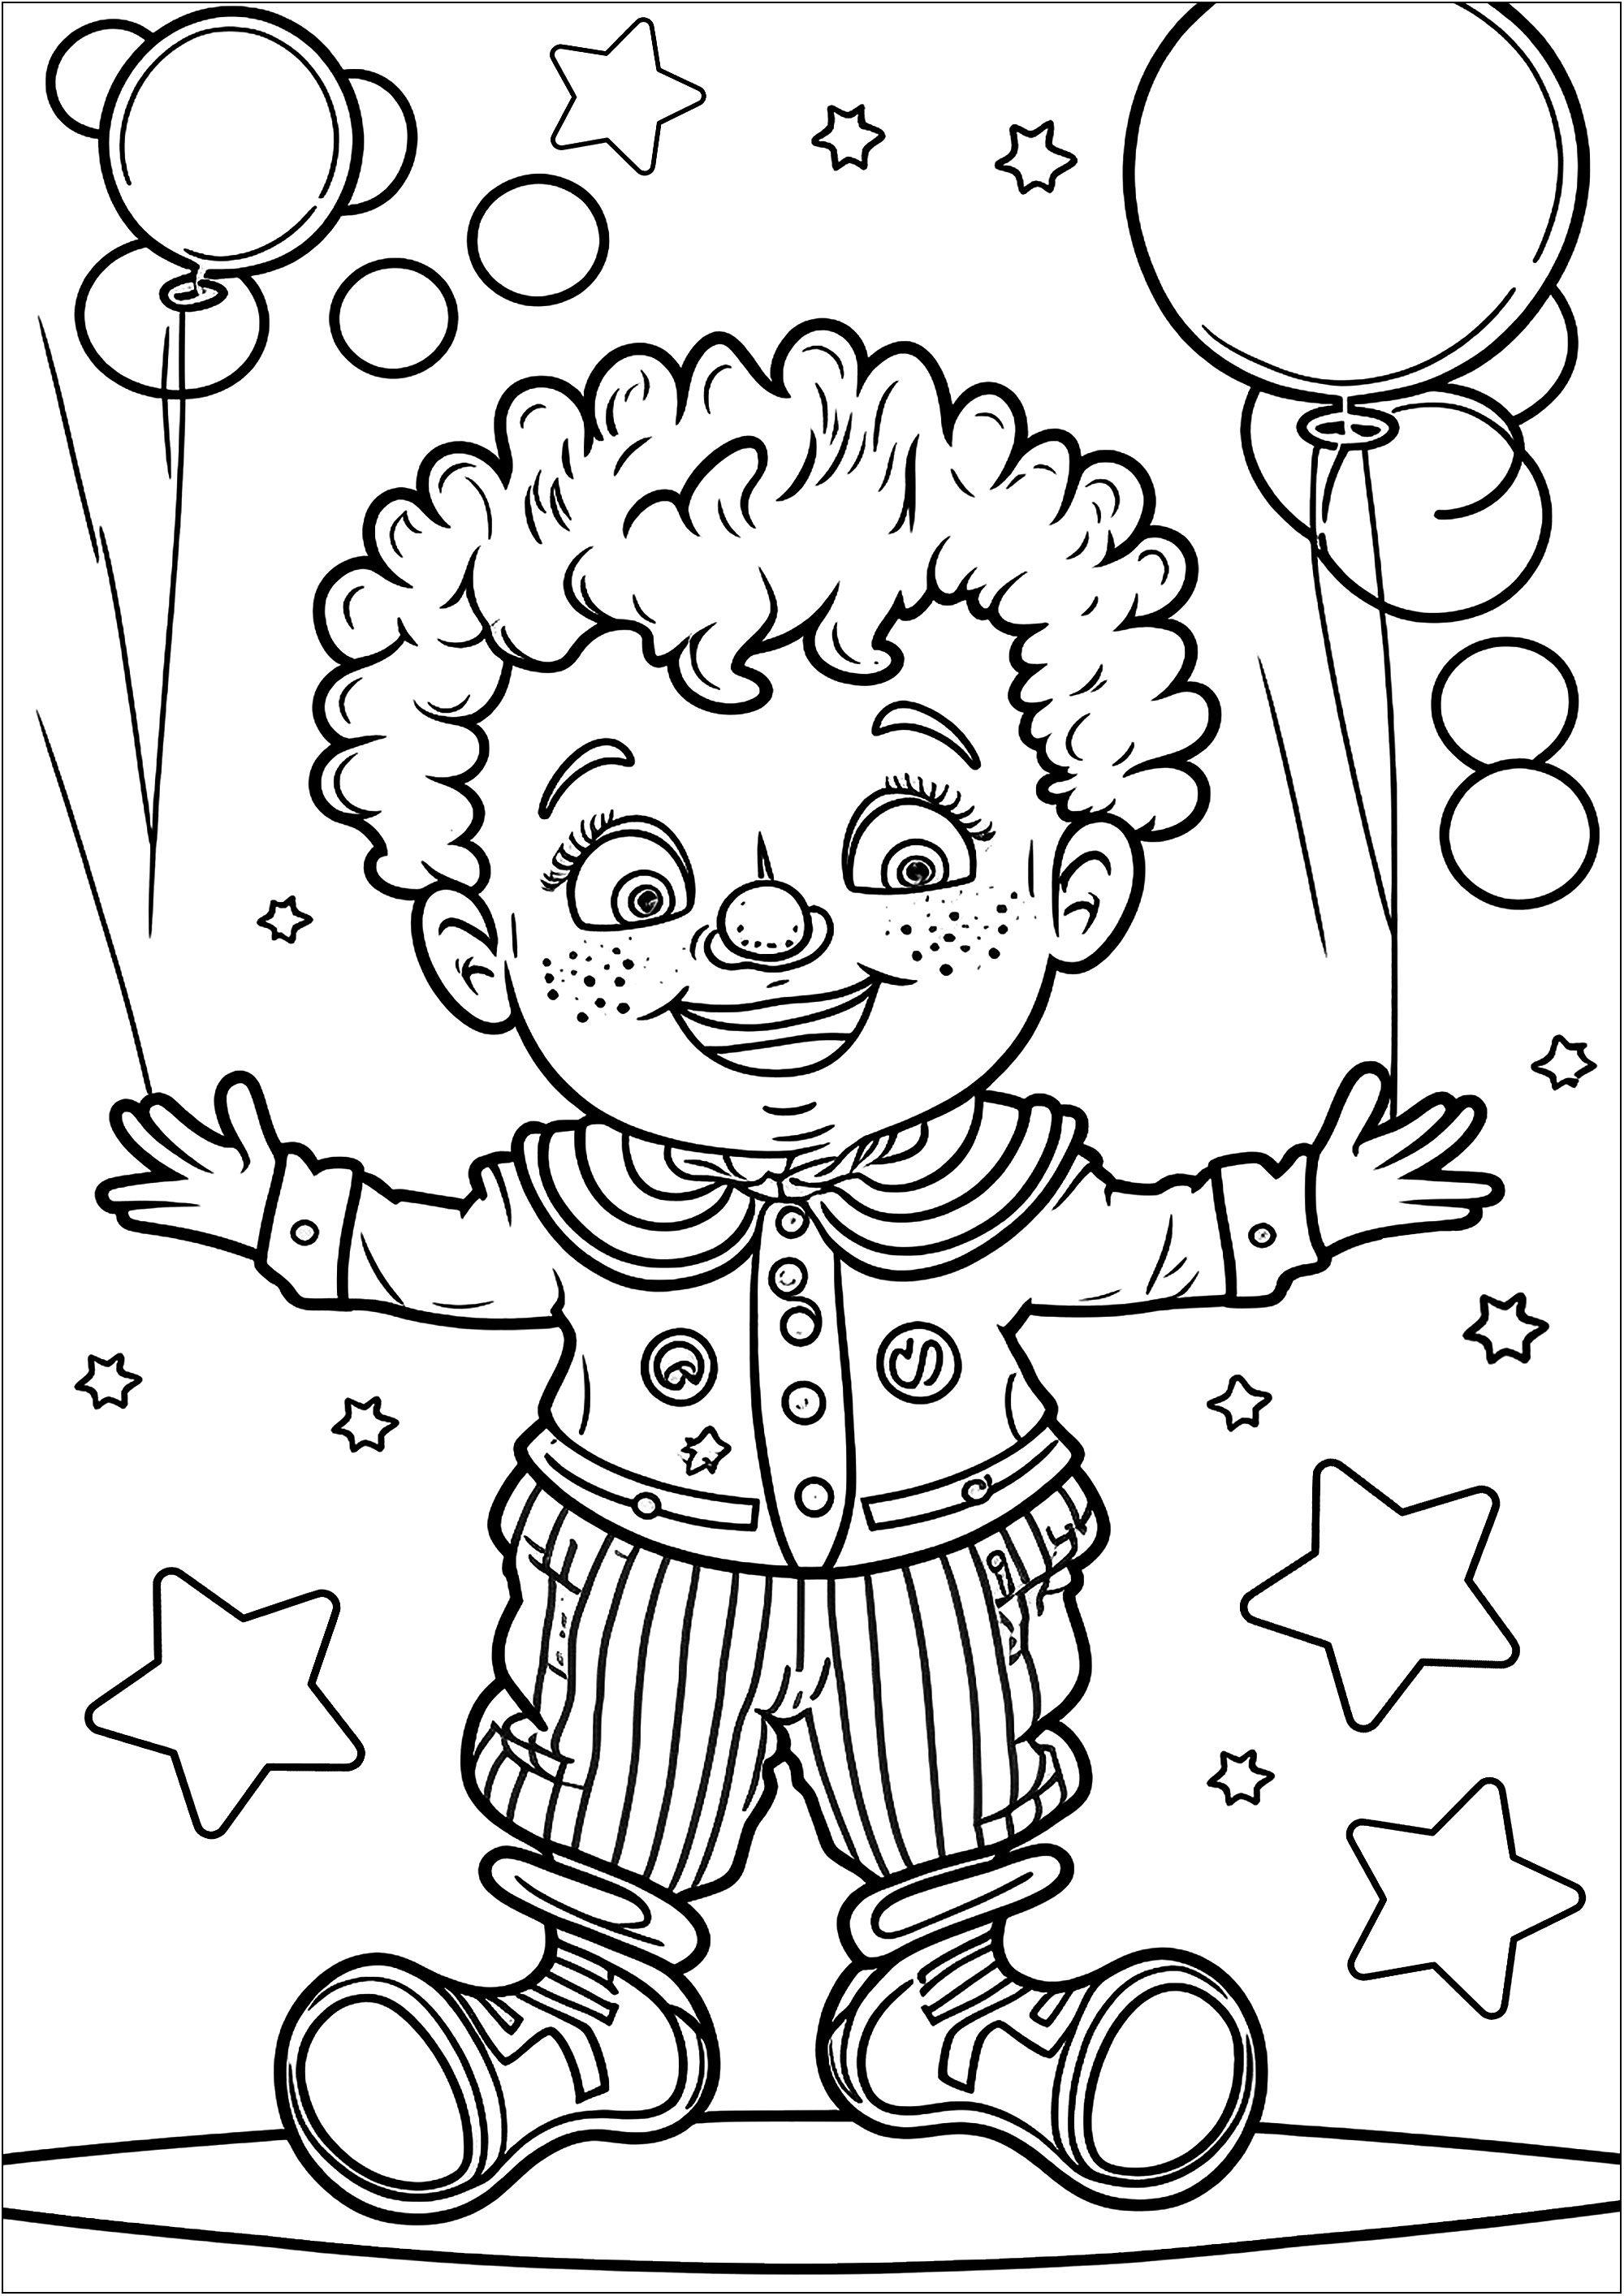 Young clown and his balloons. This friendly clown is shown with a big smile and an outfit full of details to color. He is playing with several balloons.Don't forget to color his clown nose (in red of course) to add a touch of fun to this beautiful circus-themed coloring page.